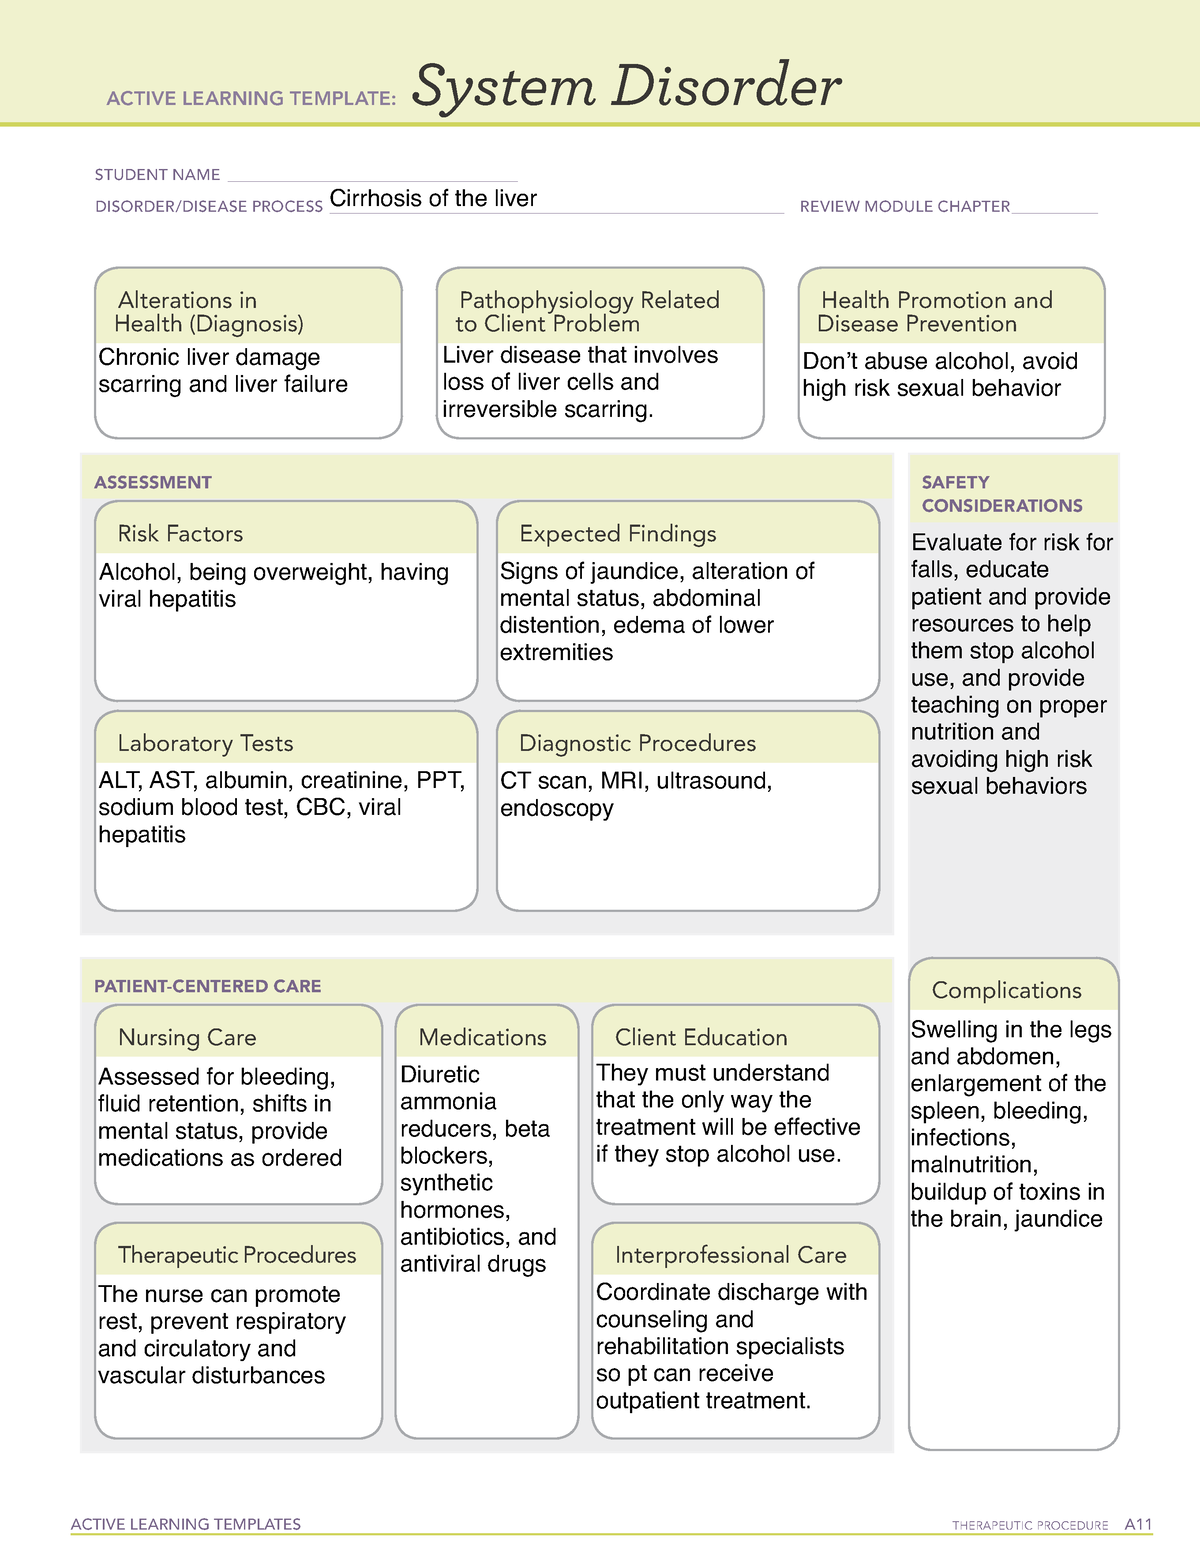 Cirrhosis of the liver Ati med temp ACTIVE LEARNING TEMPLATES